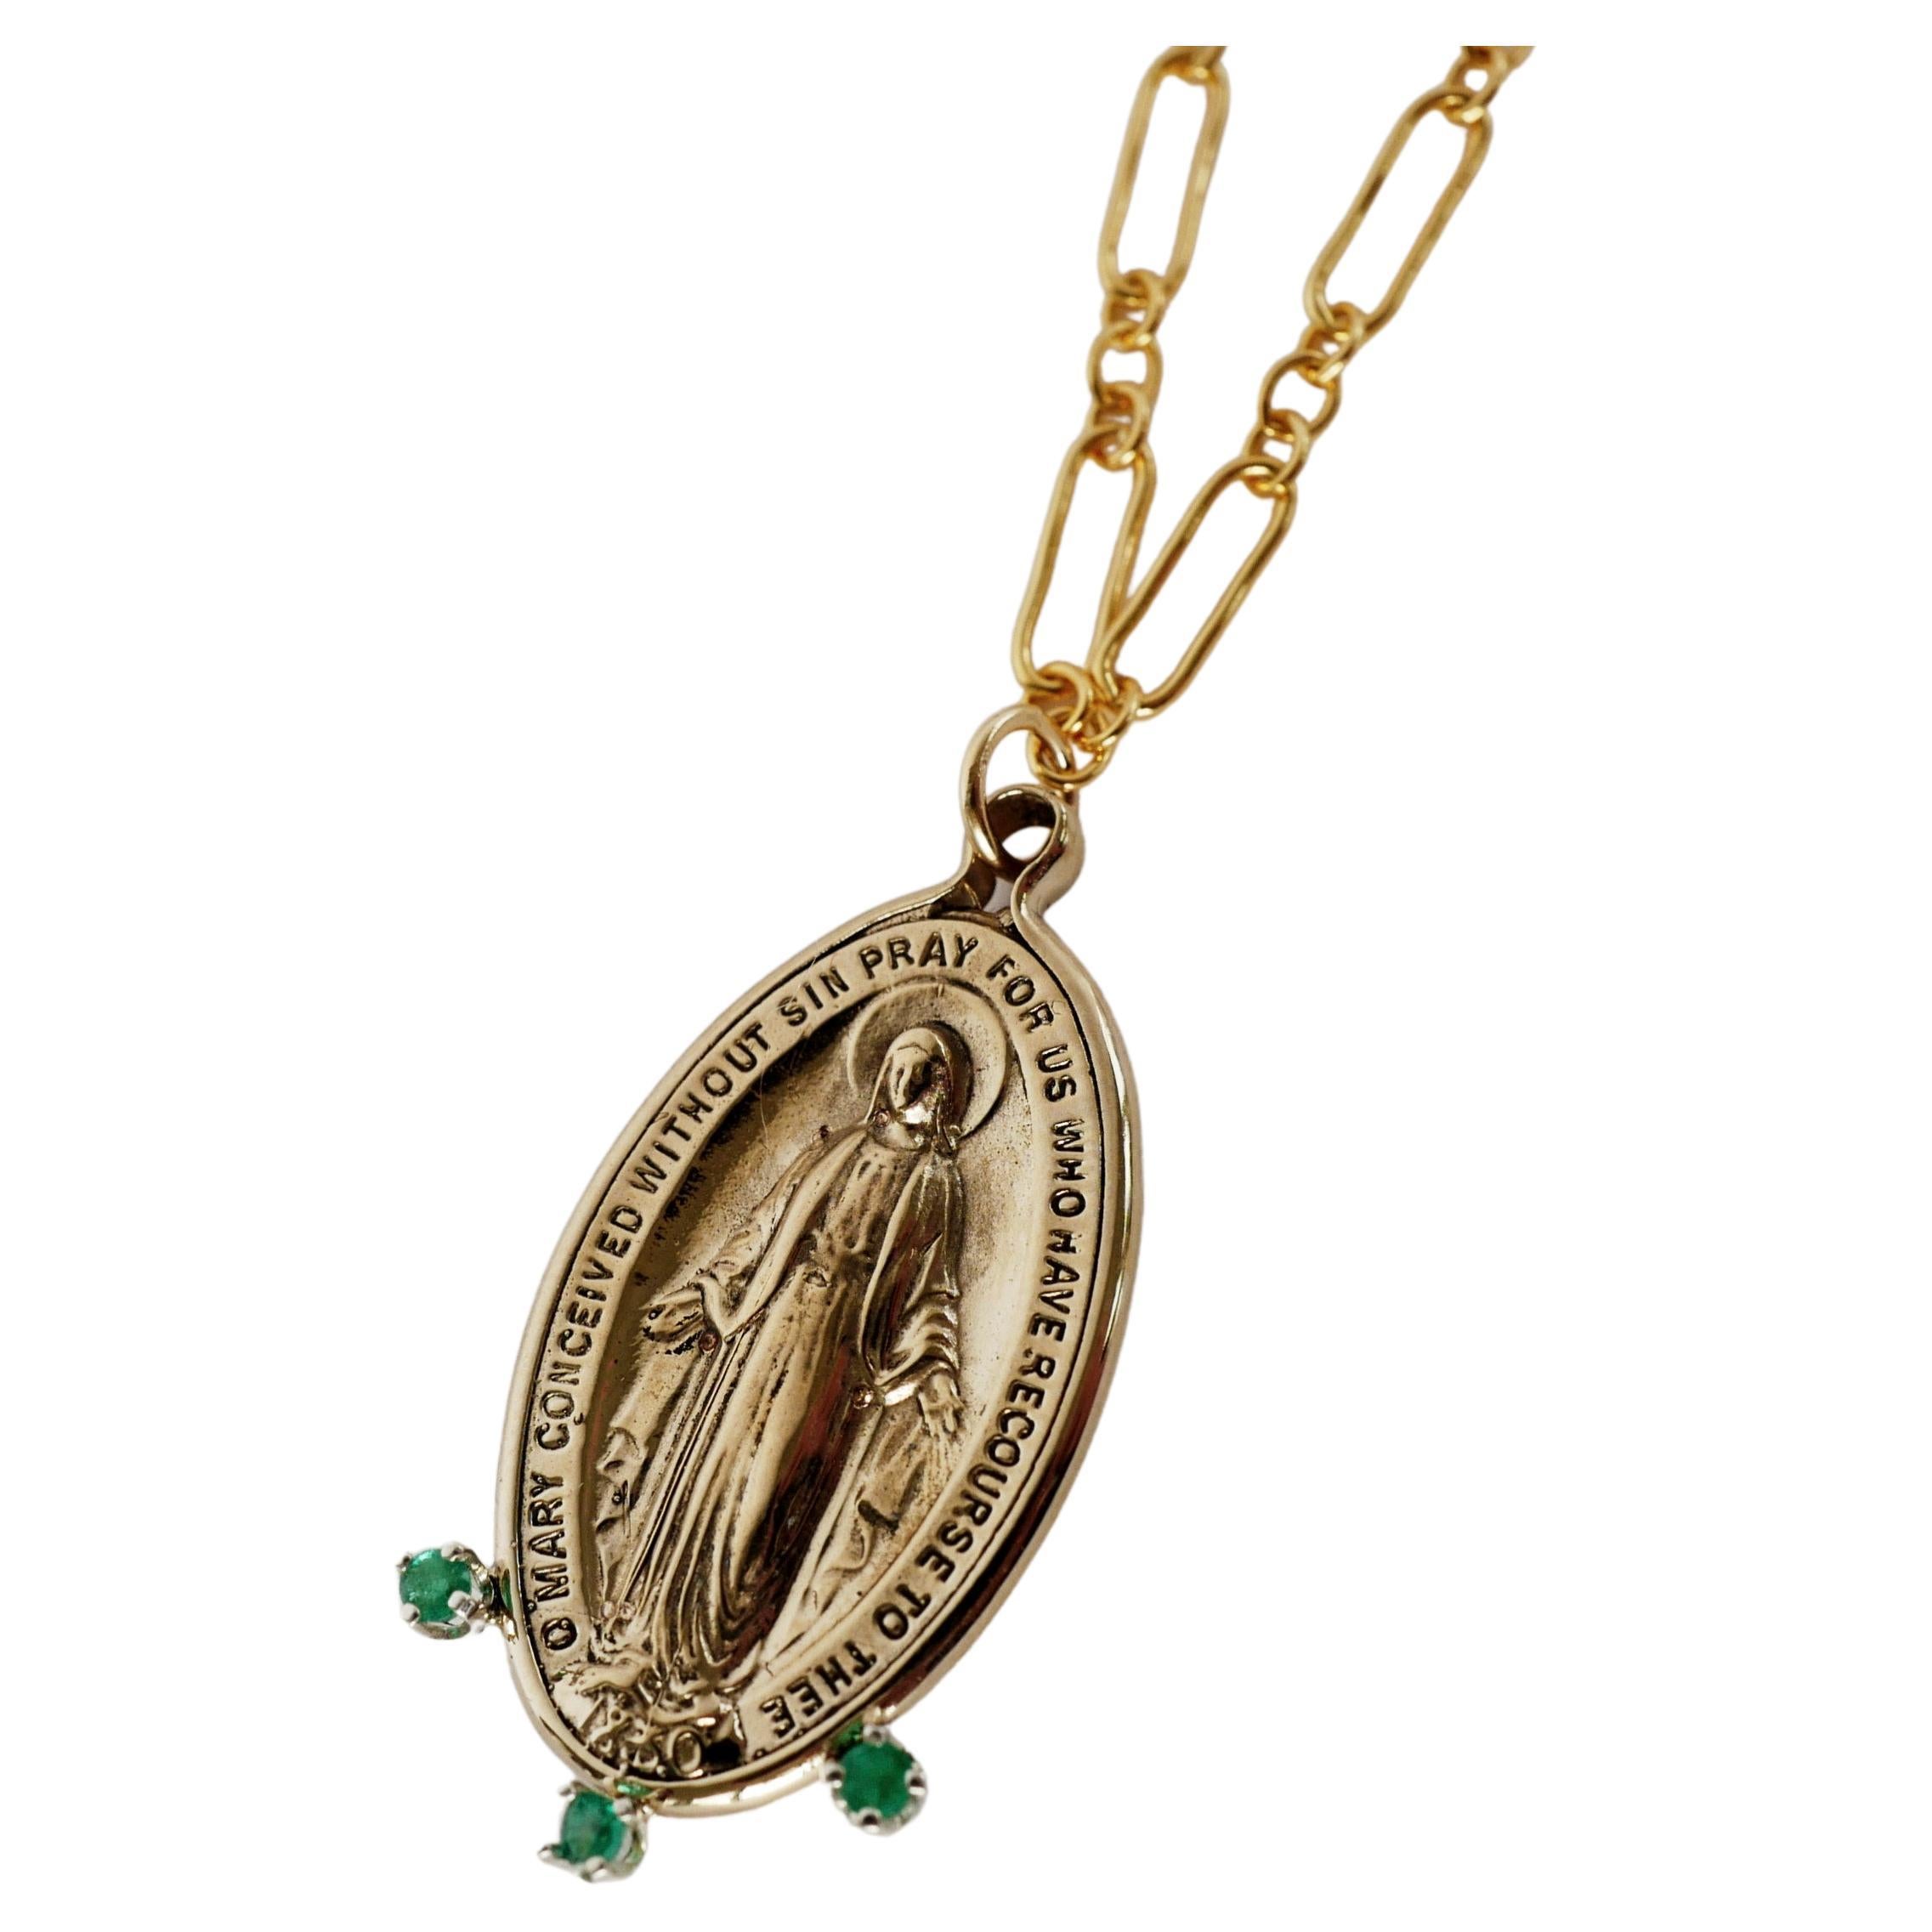 Emerald Virgin Mary Medal Pendant Chain Necklace J Dauphin